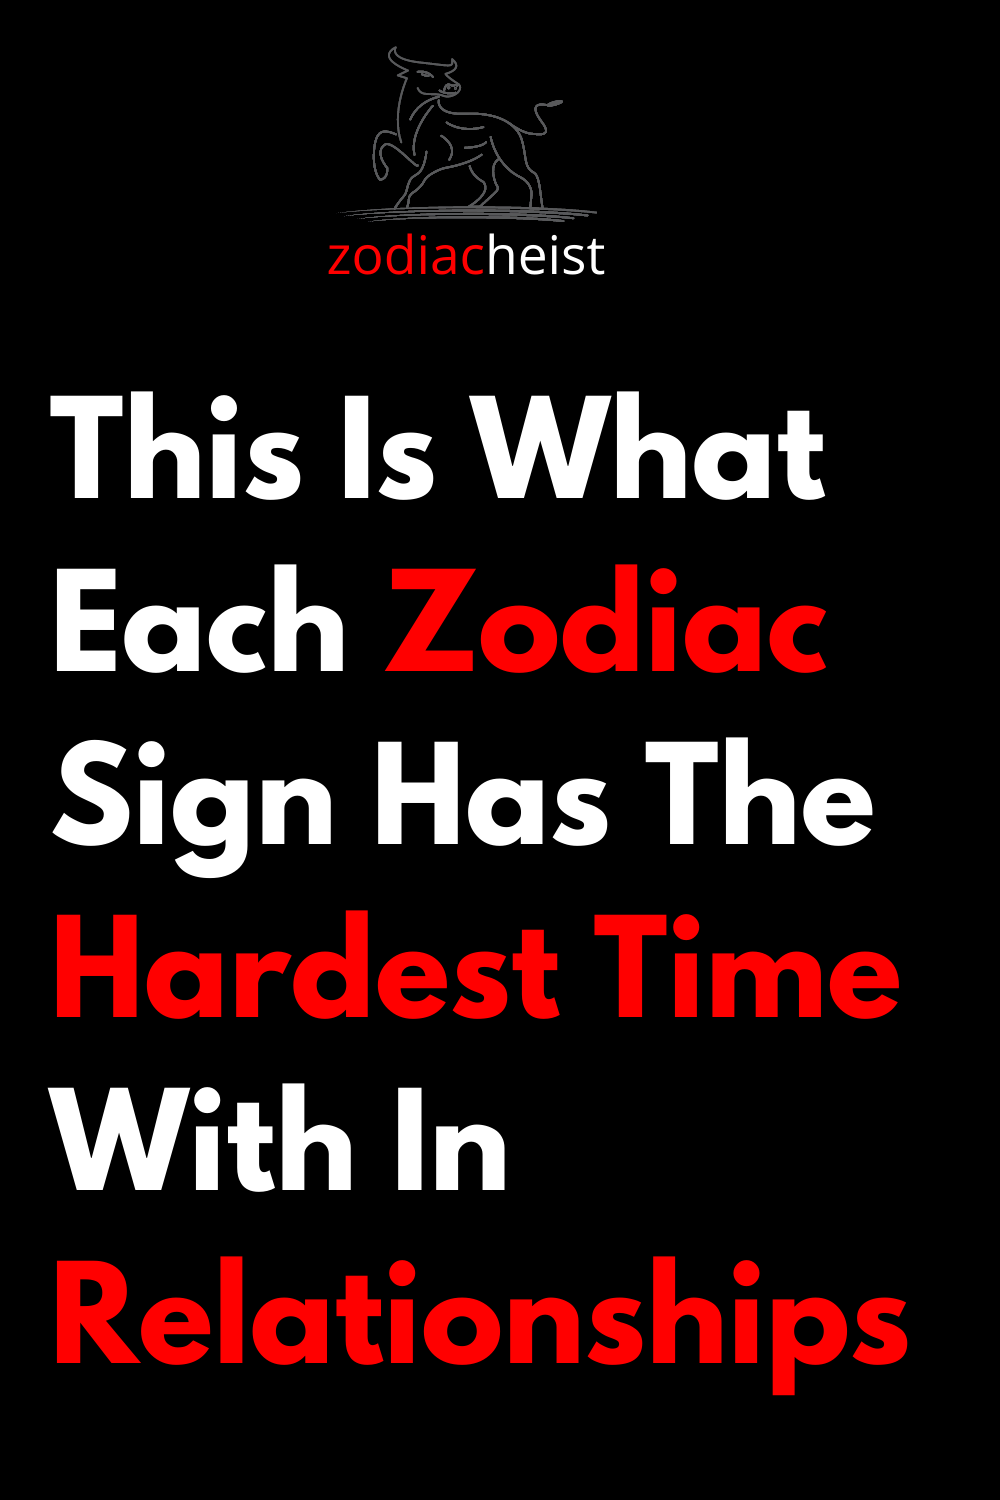 This Is What Each Zodiac Sign Has The Hardest Time With In Relationships